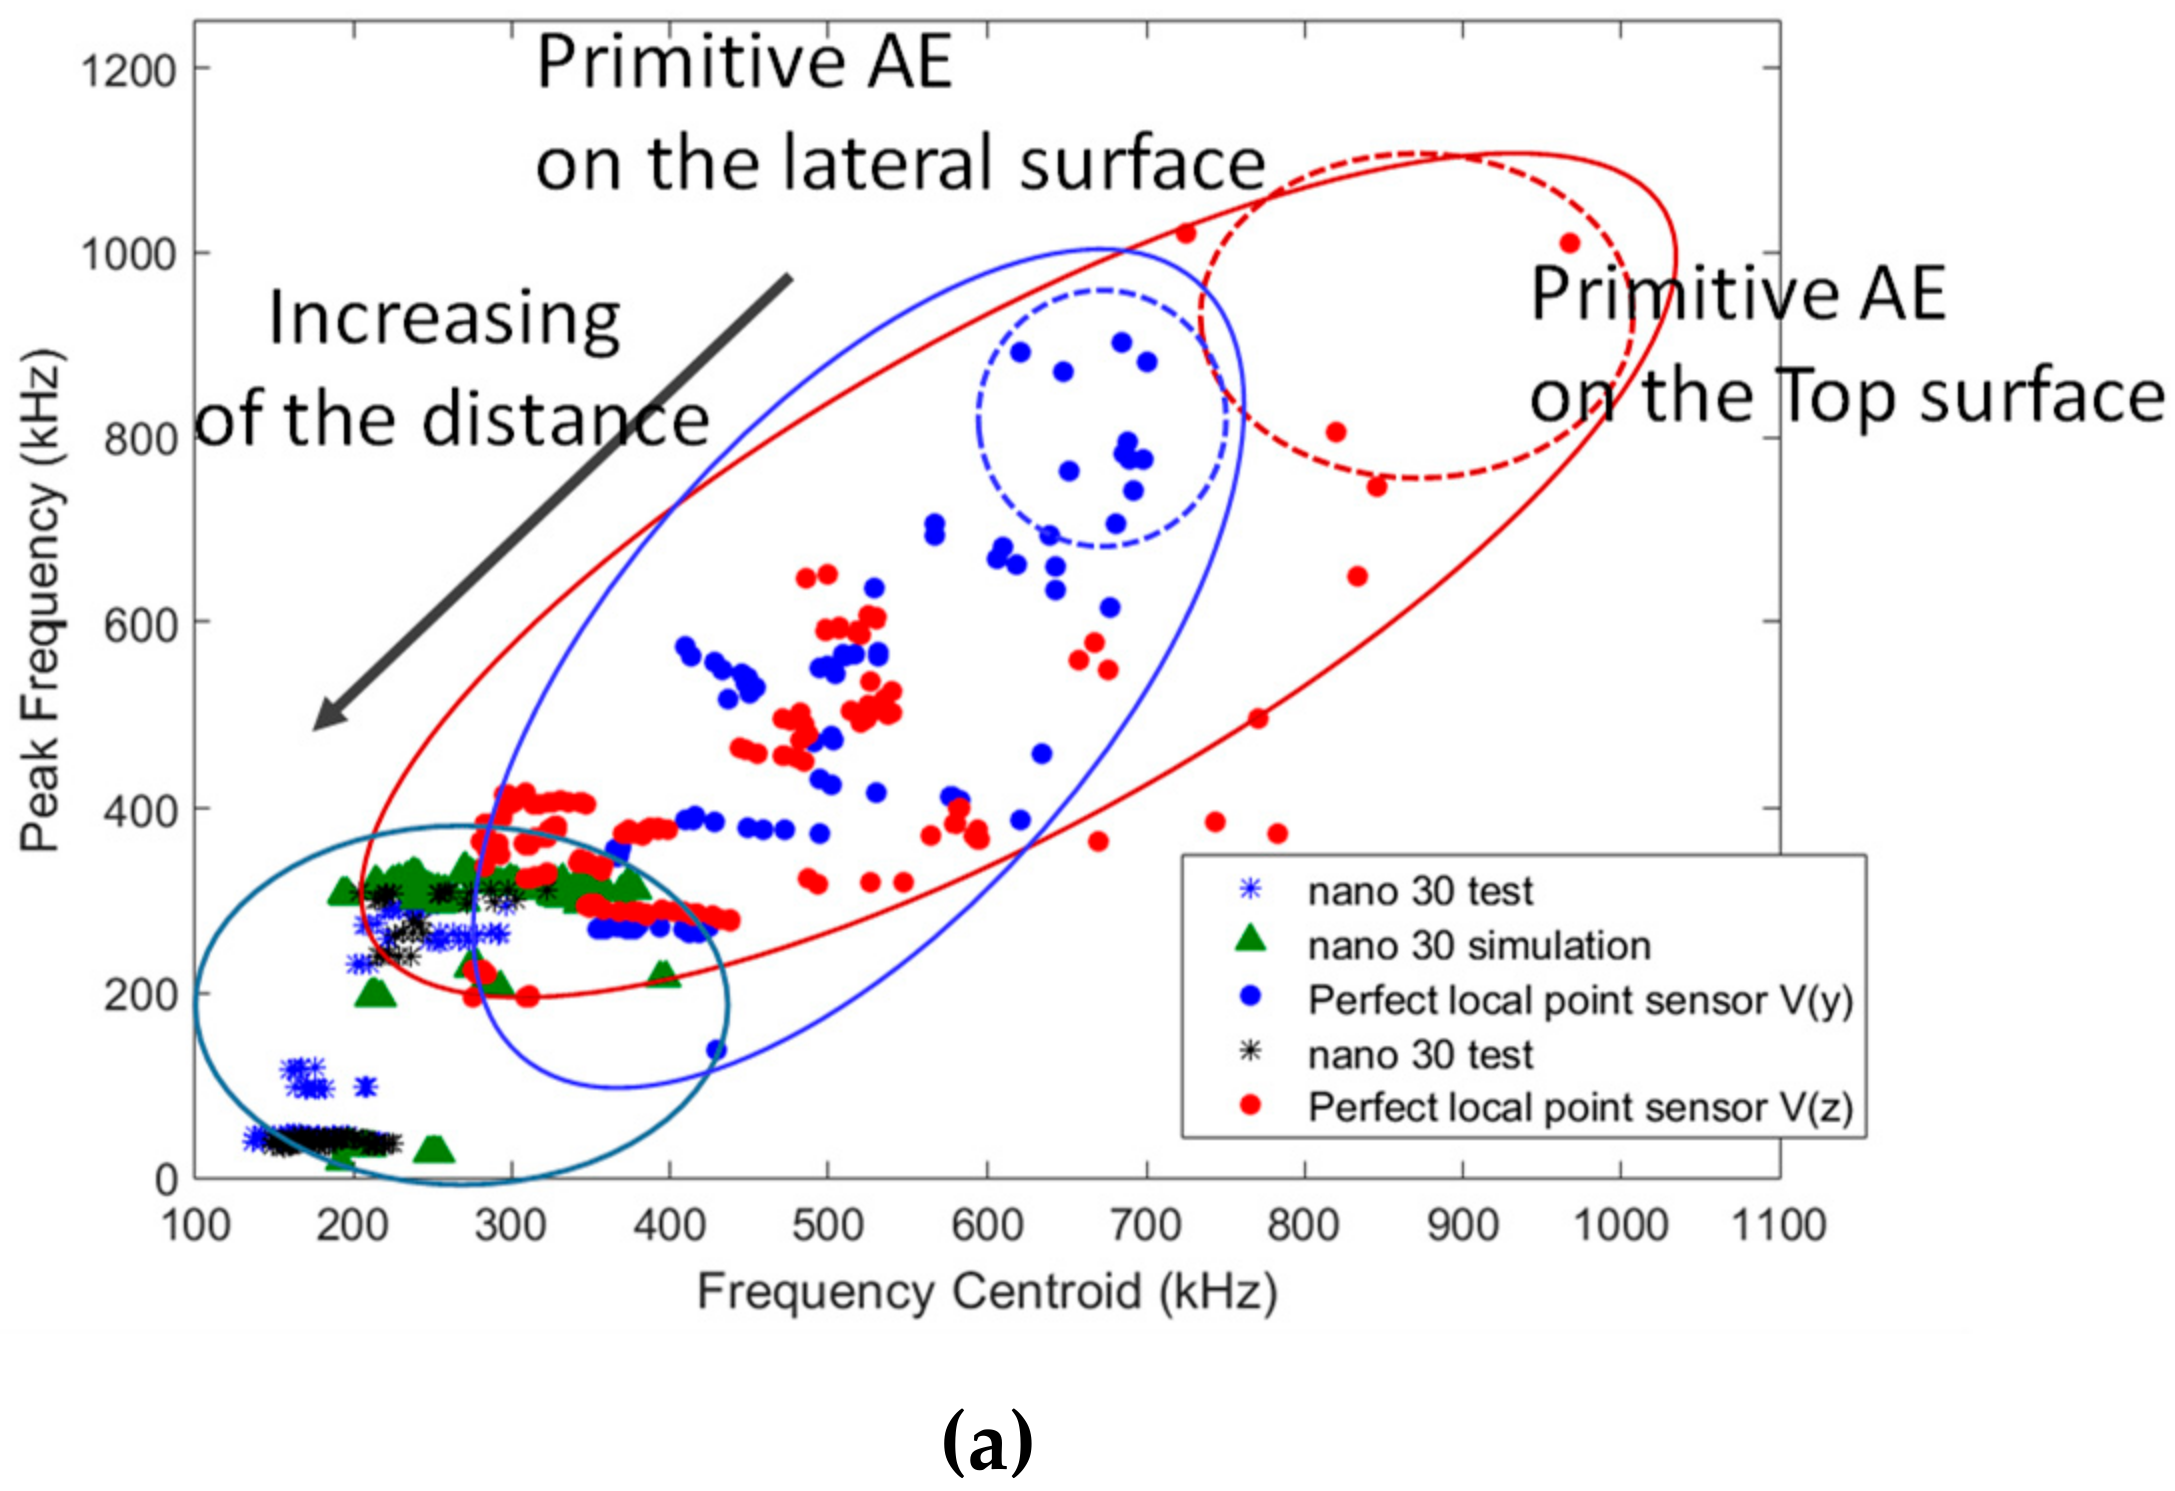 Applied Sciences Free Full Text Modelling Of Acoustic Emission Signals Due To Fiber Break In A Model Composite Carbon Epoxy Experimental Validation And Parametric Study Html